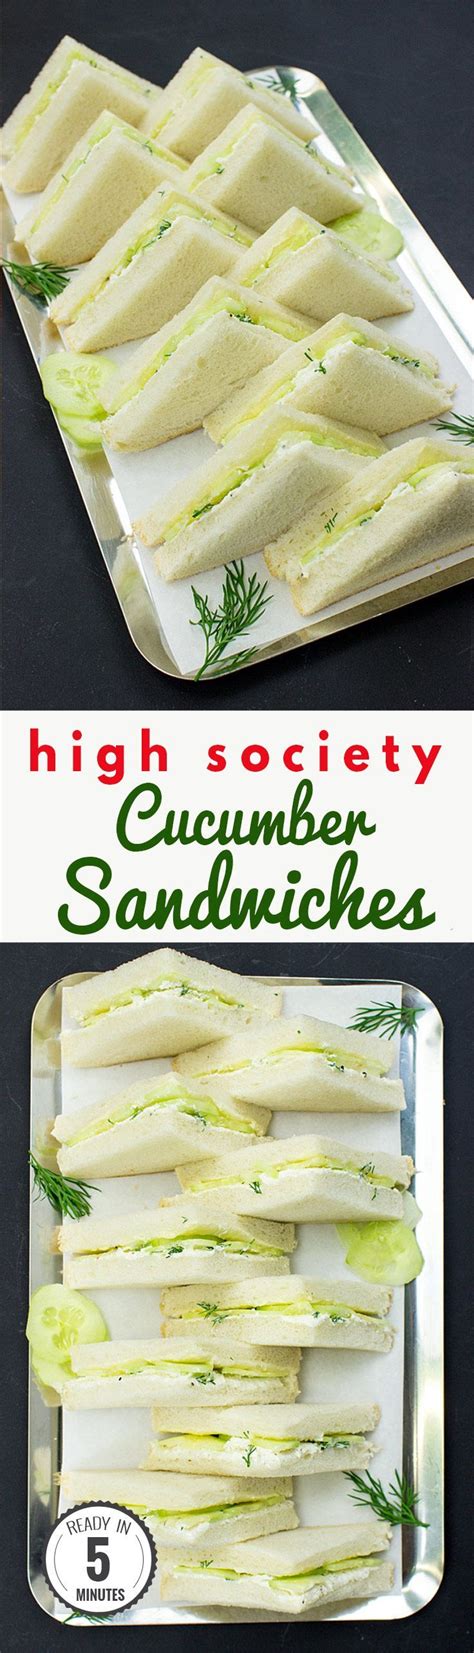 High Society Cucumber Sandwiches The Dos And Donts Hurrythefoodup